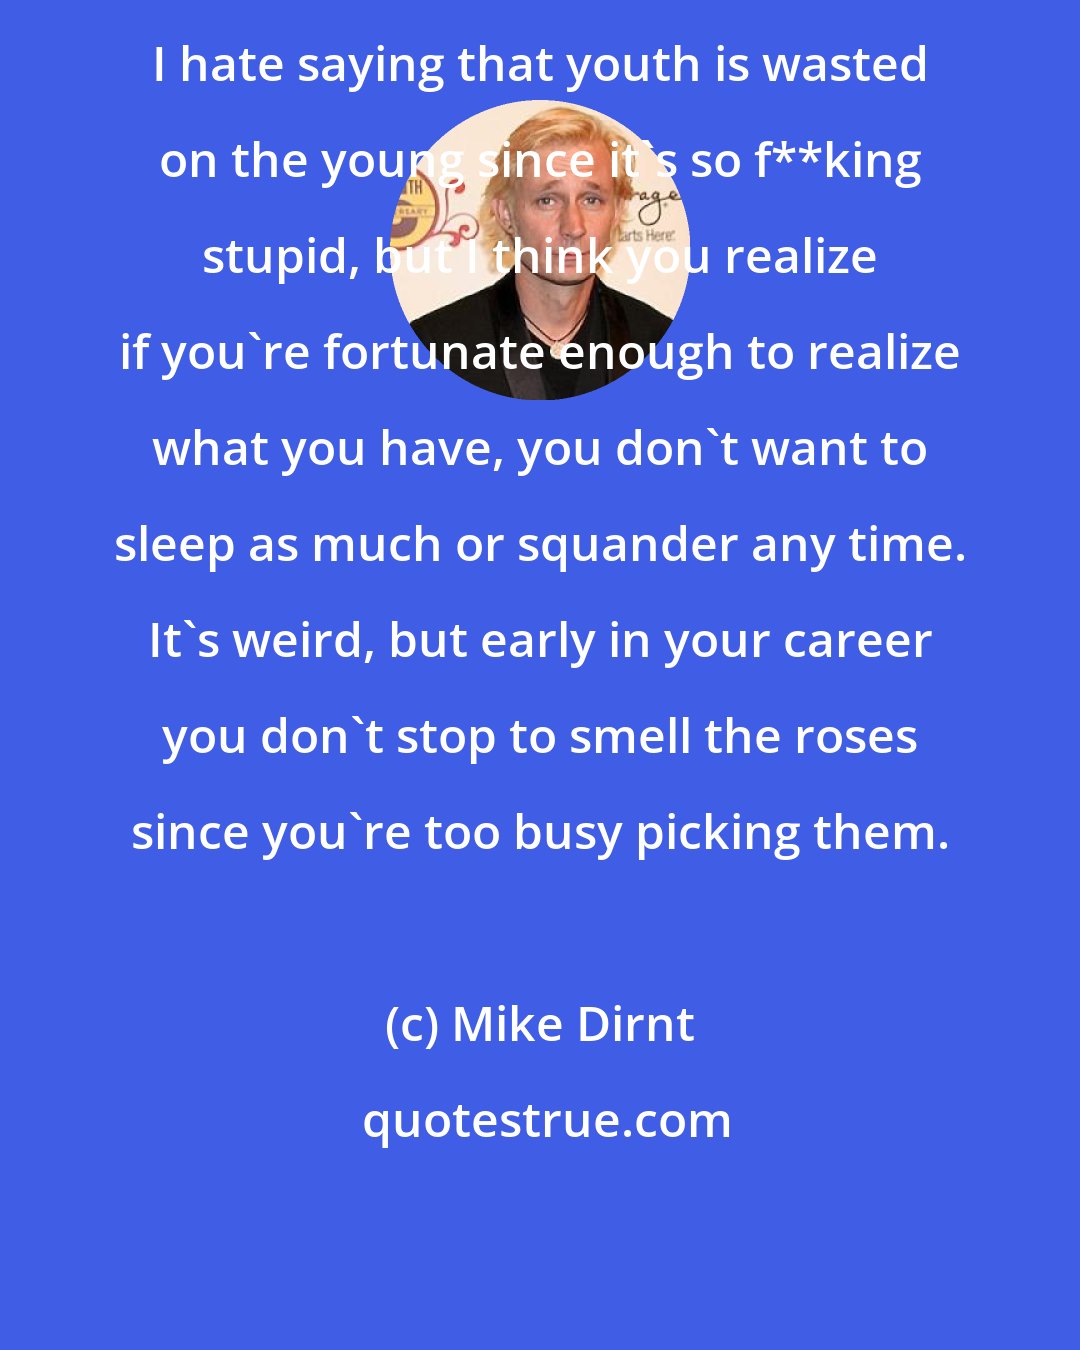 Mike Dirnt: I hate saying that youth is wasted on the young since it's so f**king stupid, but I think you realize if you're fortunate enough to realize what you have, you don't want to sleep as much or squander any time. It's weird, but early in your career you don't stop to smell the roses since you're too busy picking them.